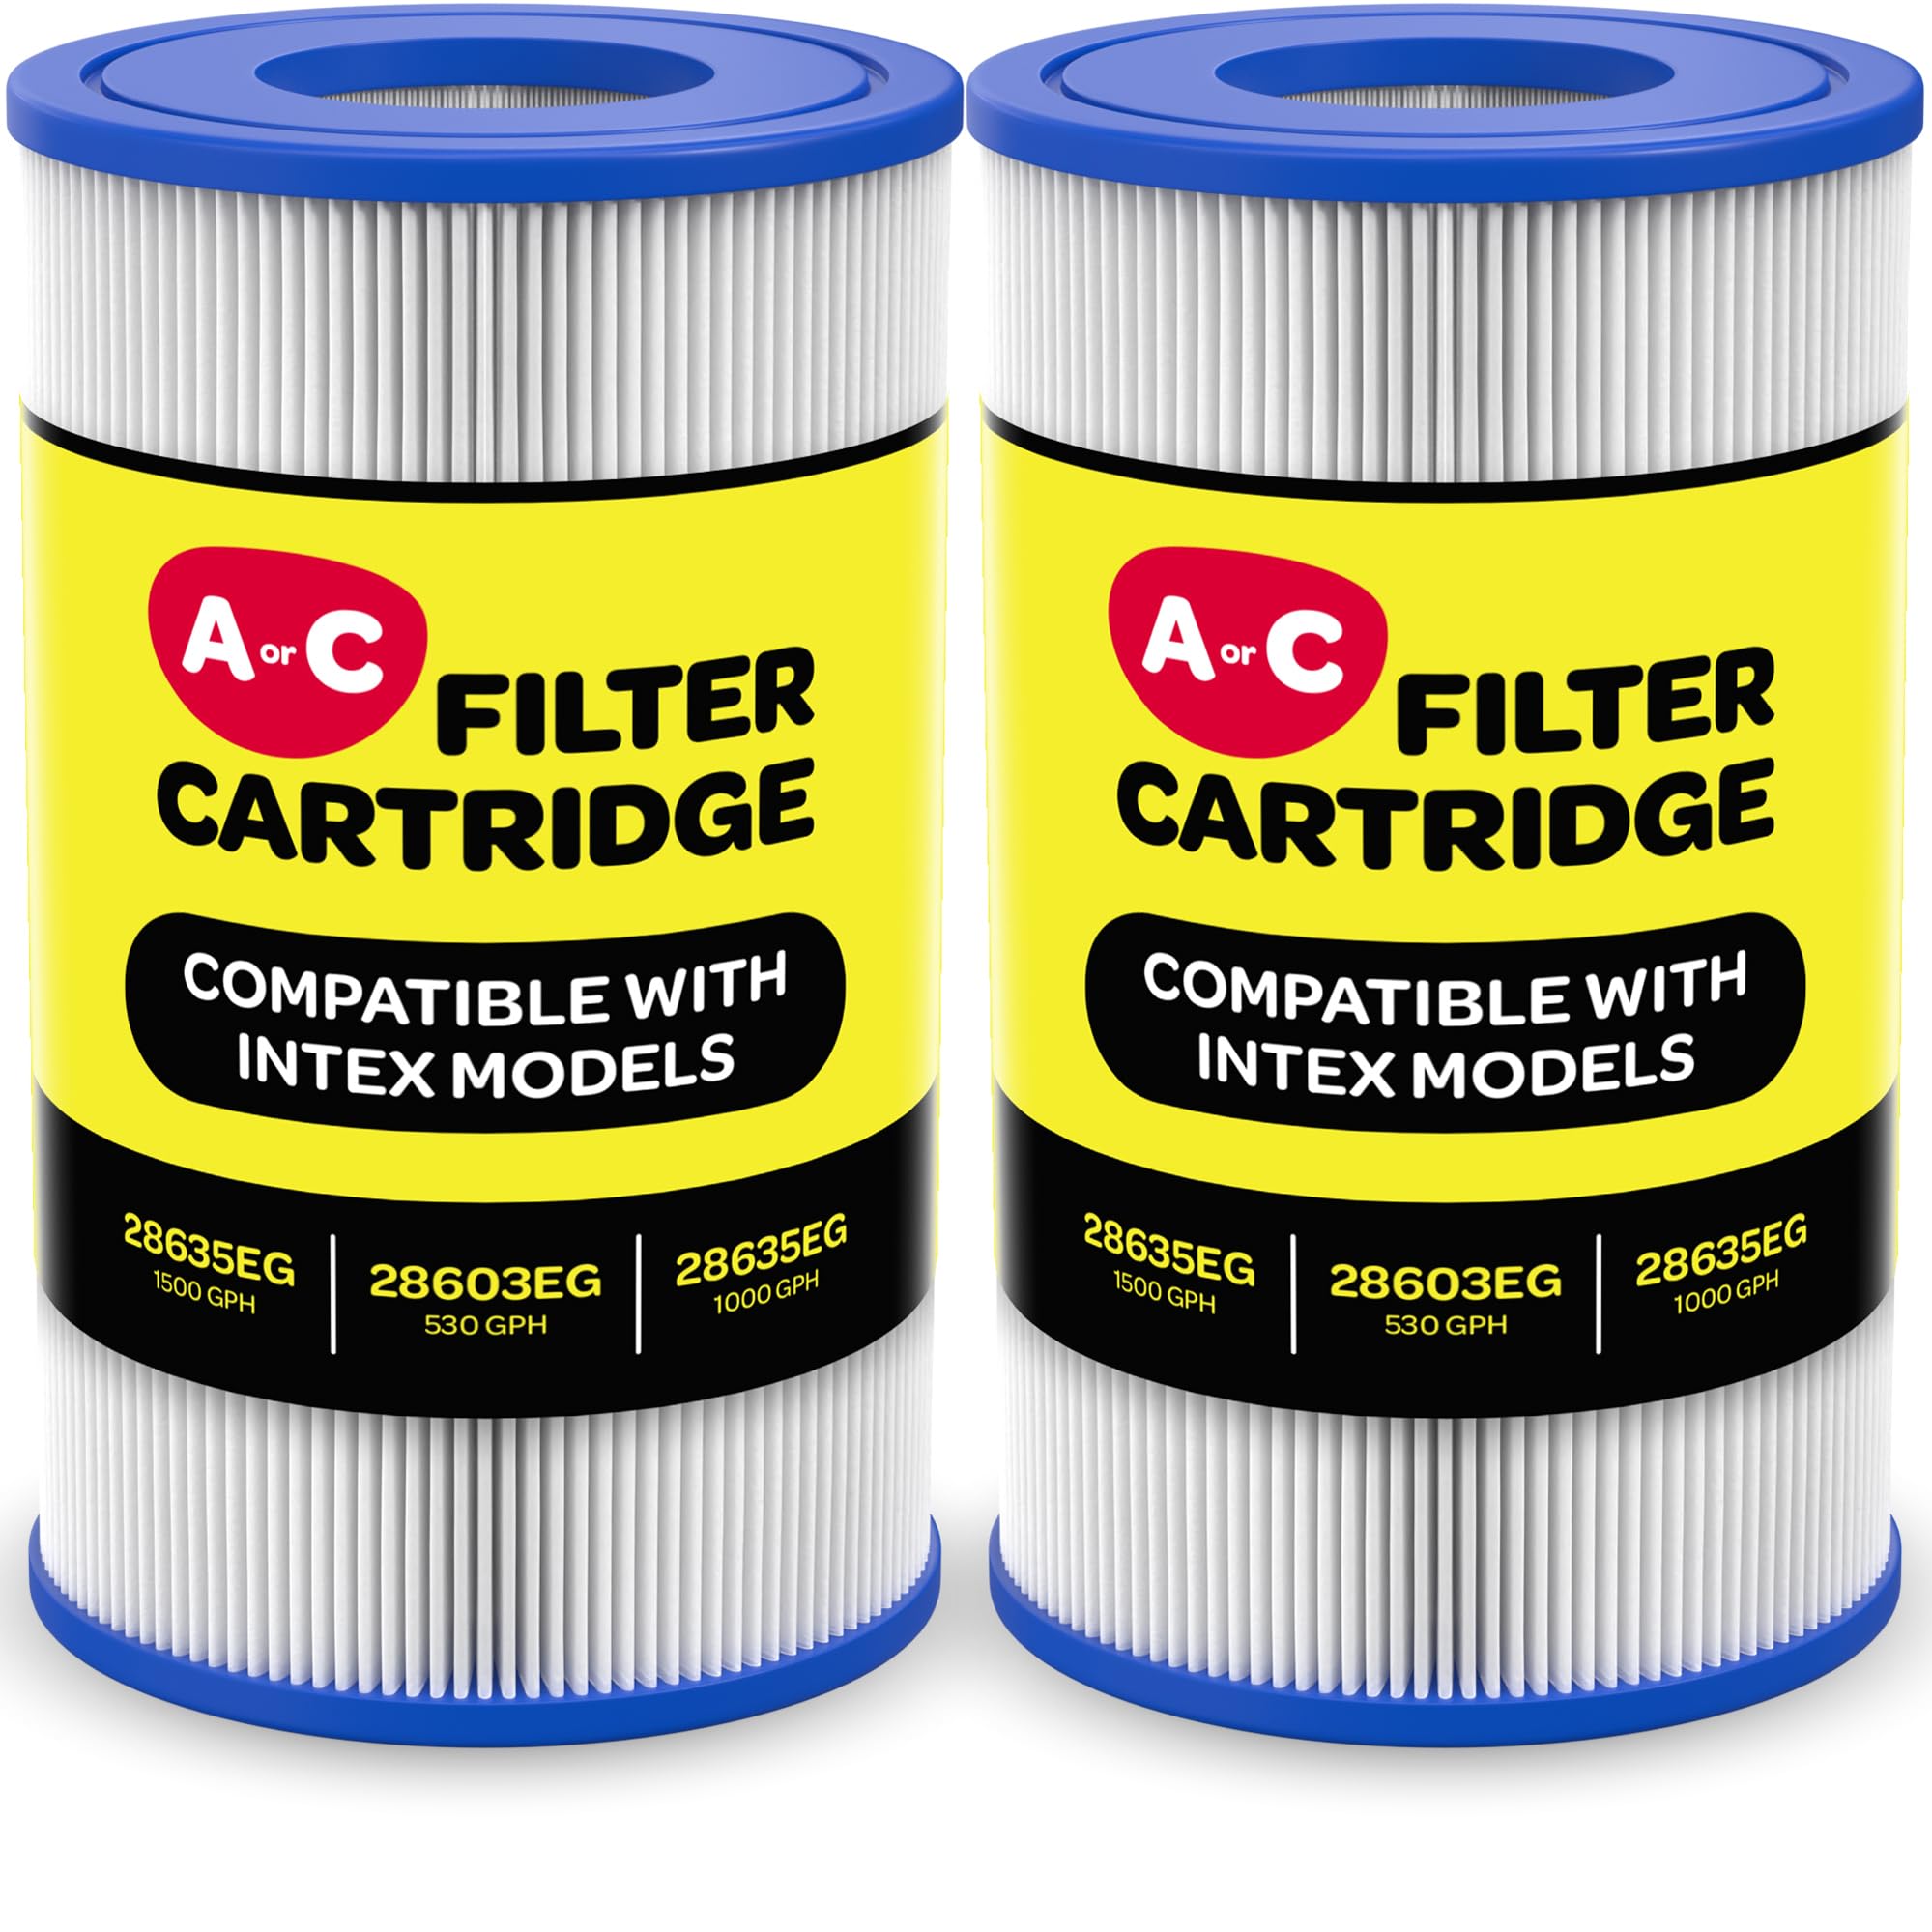 Filters type a or c, hot tub filter,  - Acceptable